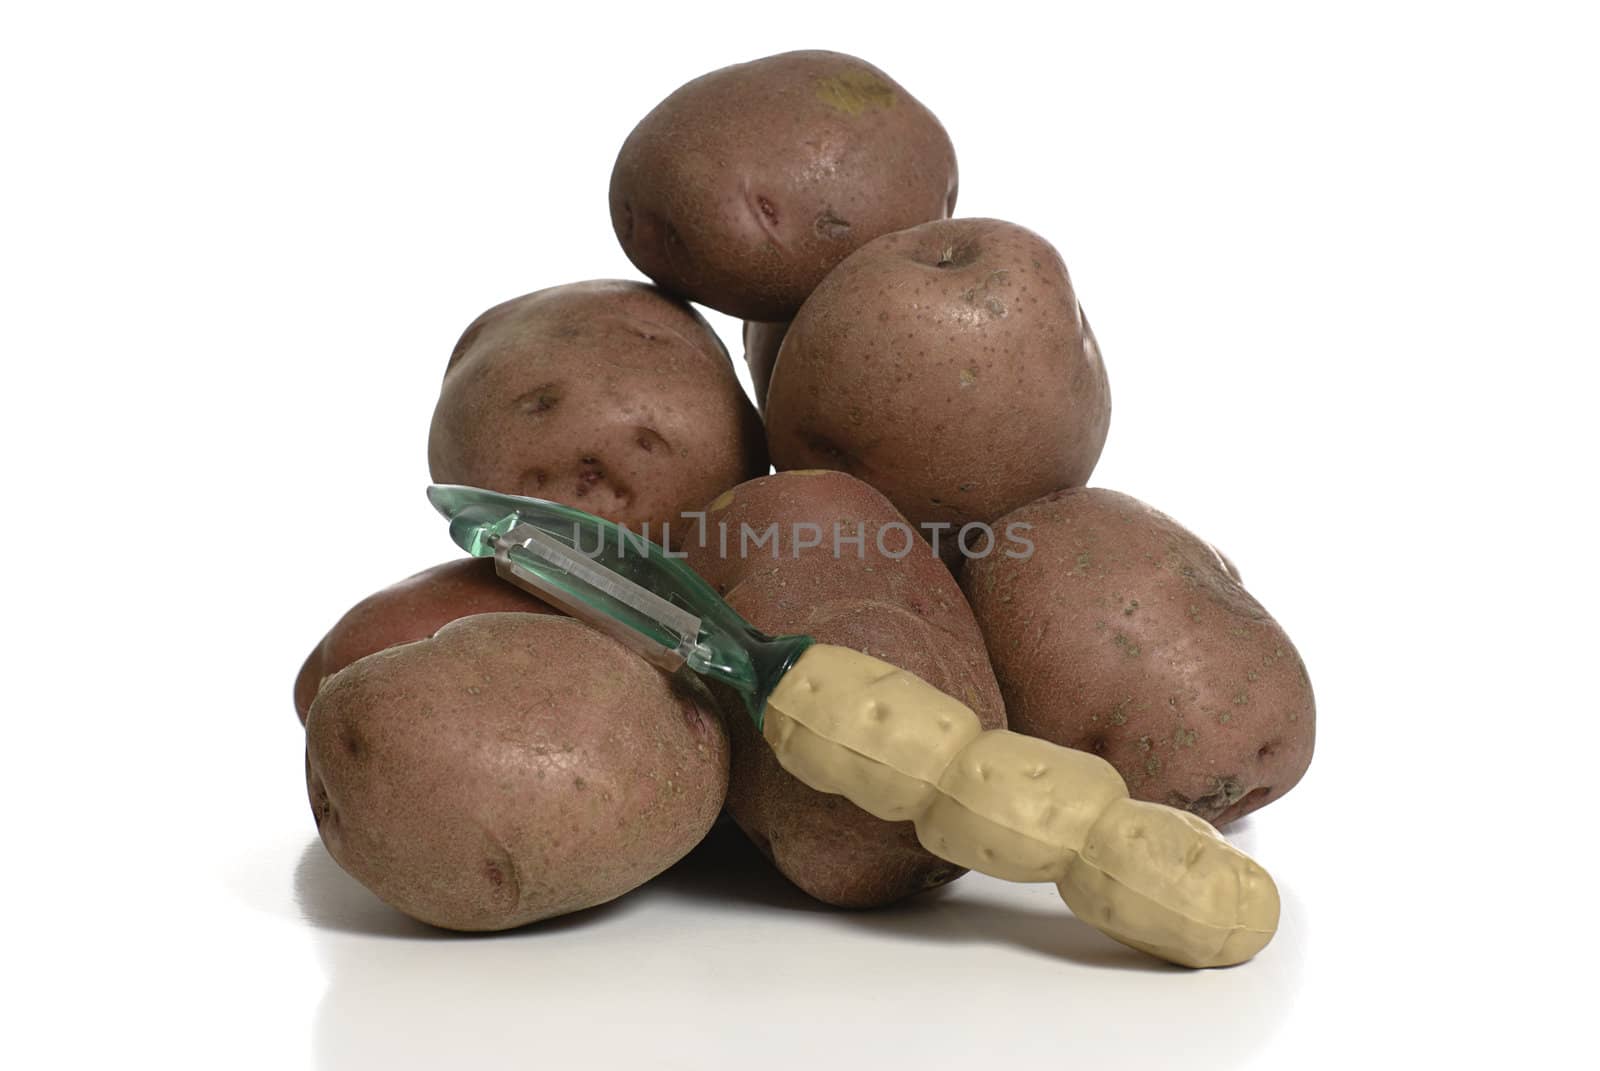 A potato peeler ready to be used on this pile of organic red potatoes, shot on a white background, with a reflection